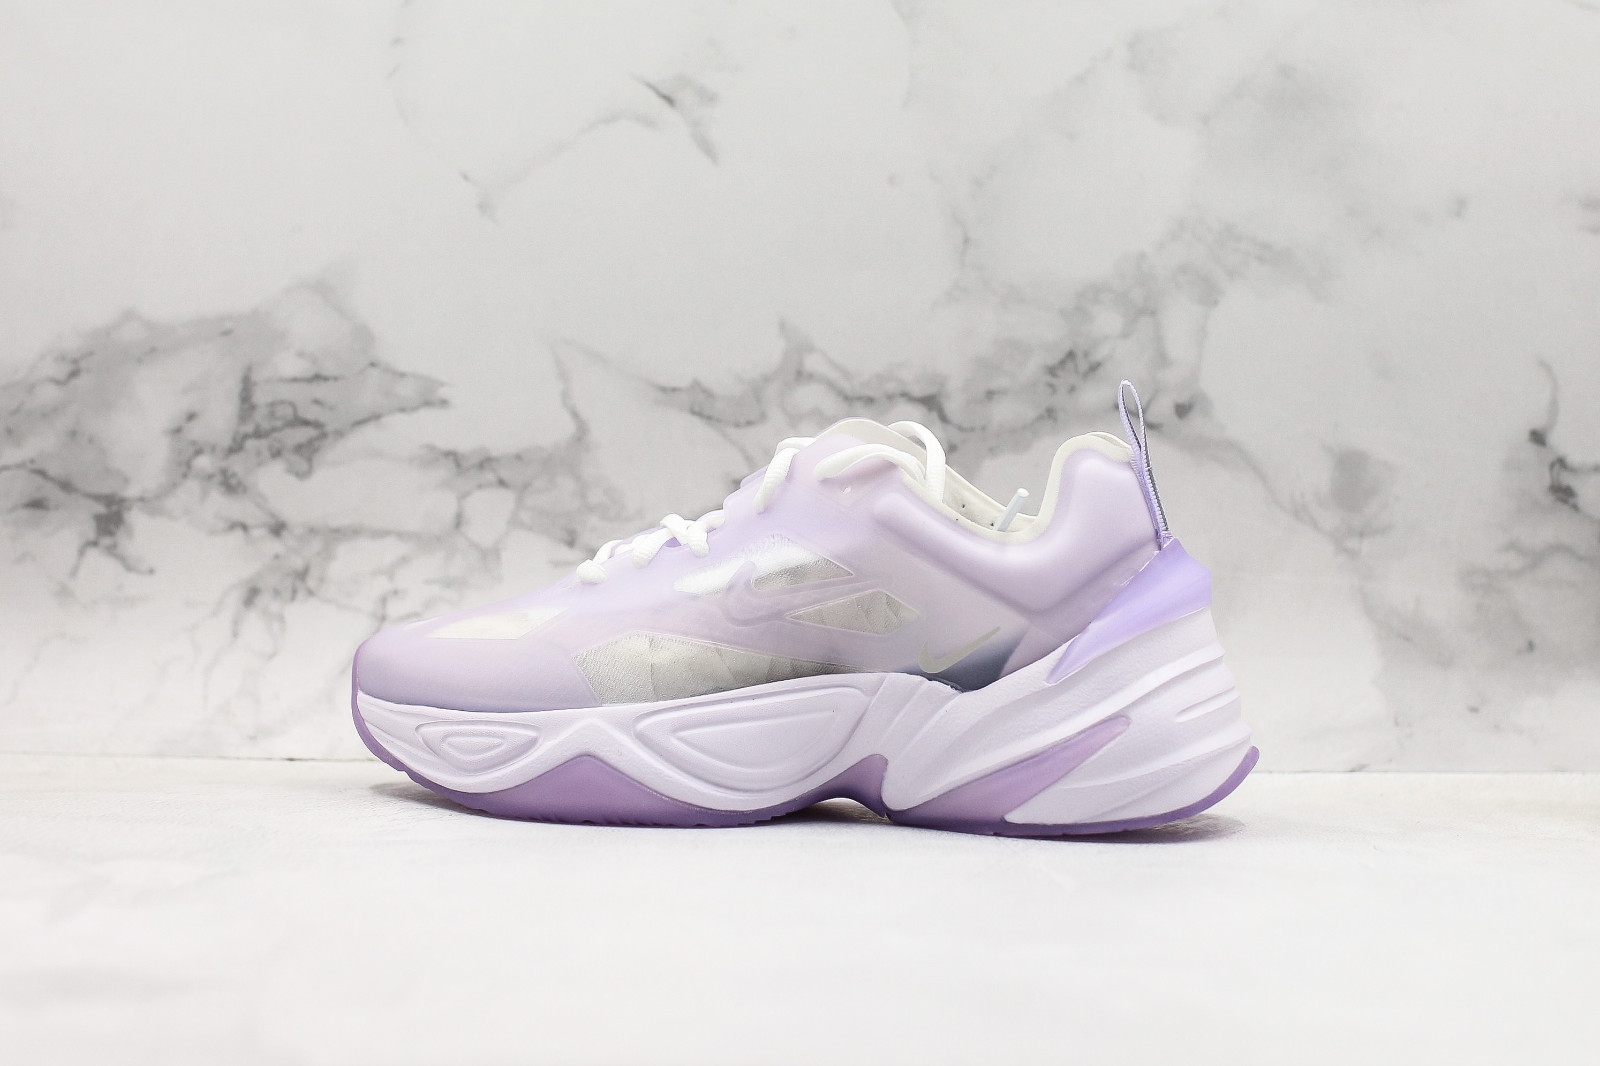 temperatuur zacht metro Womens Air Force 1 Low Multi Swoosh Blanc rouge gris White Purple Black  Running Shoes AO3108 - AljadidShops - 505 - Nike air zoom infinity tour nrg  wide volt yellow men golf shoes dc5050-100